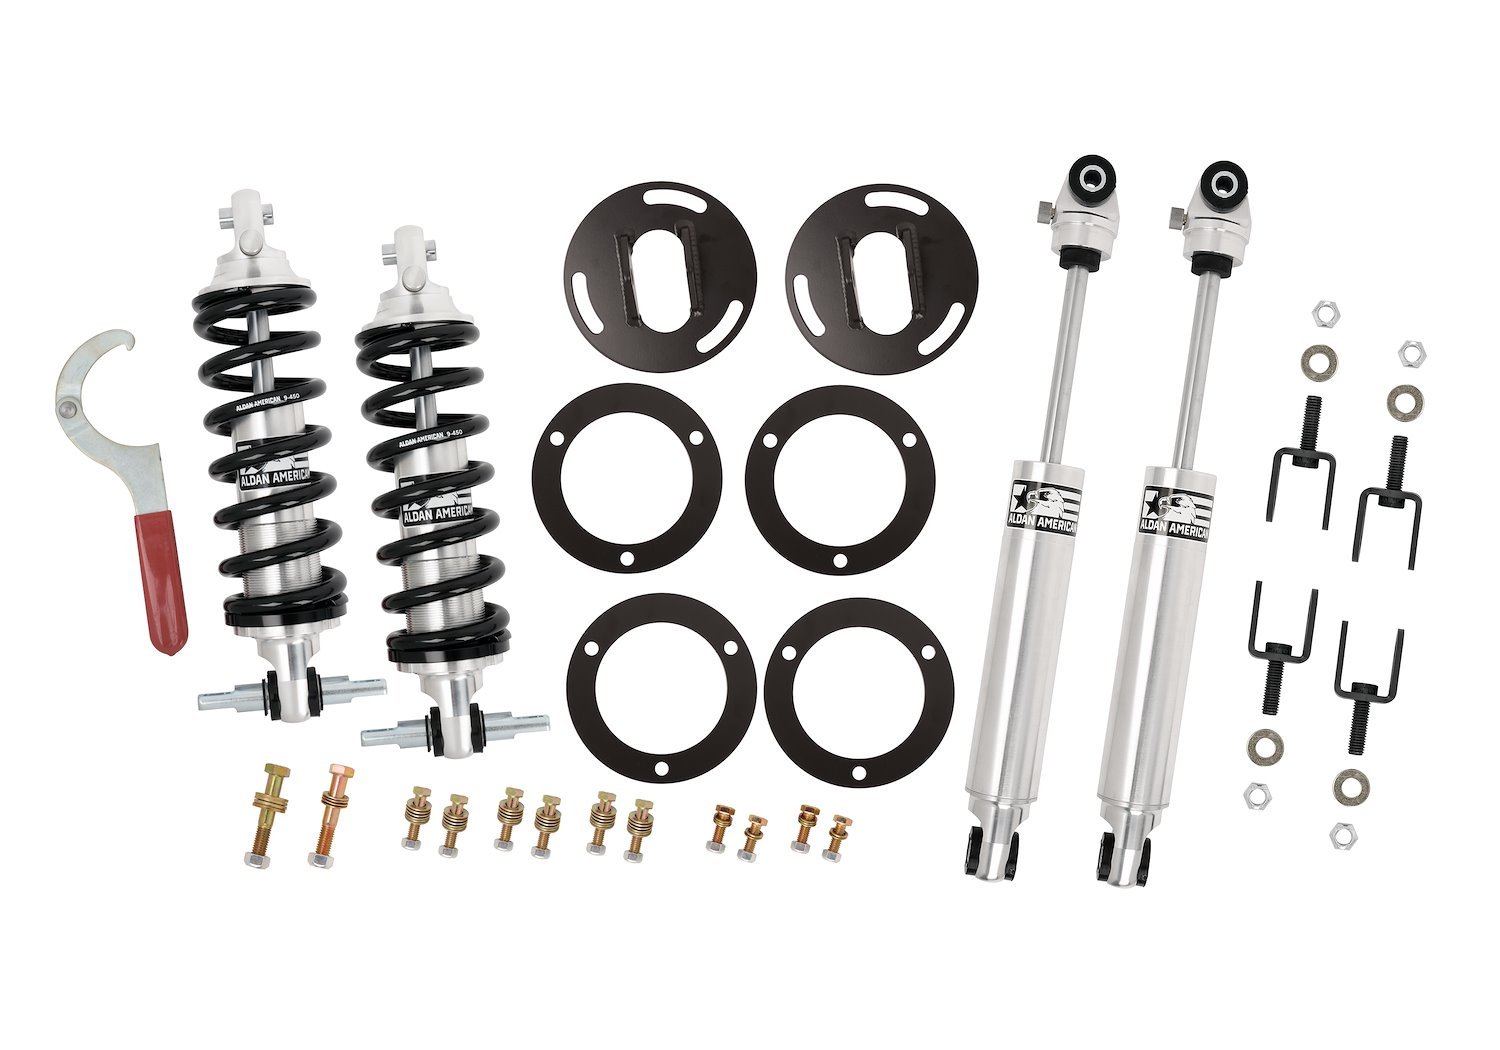 Road Comp Suspension Package Fits Select 1960-1971 Ford, Mercury Models [Small Block, 450 lb. Springs]